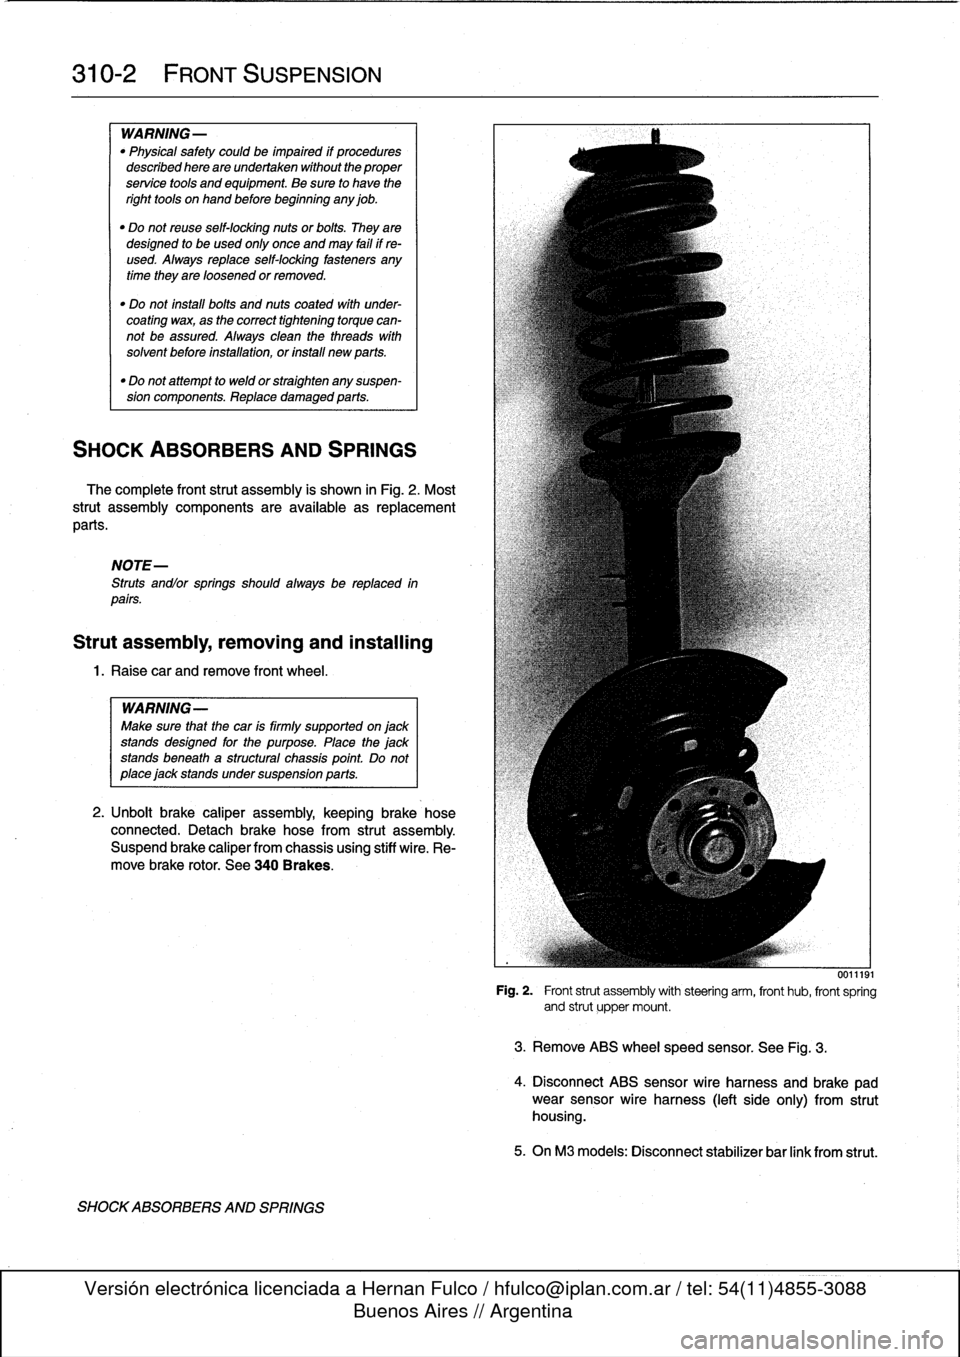 BMW 328i 1997 E36 Owners Manual 
310-2

	

FRONT
SUSPENSION

WARNING-

"
Physical
safety
could
be
impaired
if
procedures
described
here
areundertaken
without
the
proper
service
tools
and
equipment
.
Be
sure
to
have
the
right
tools
o